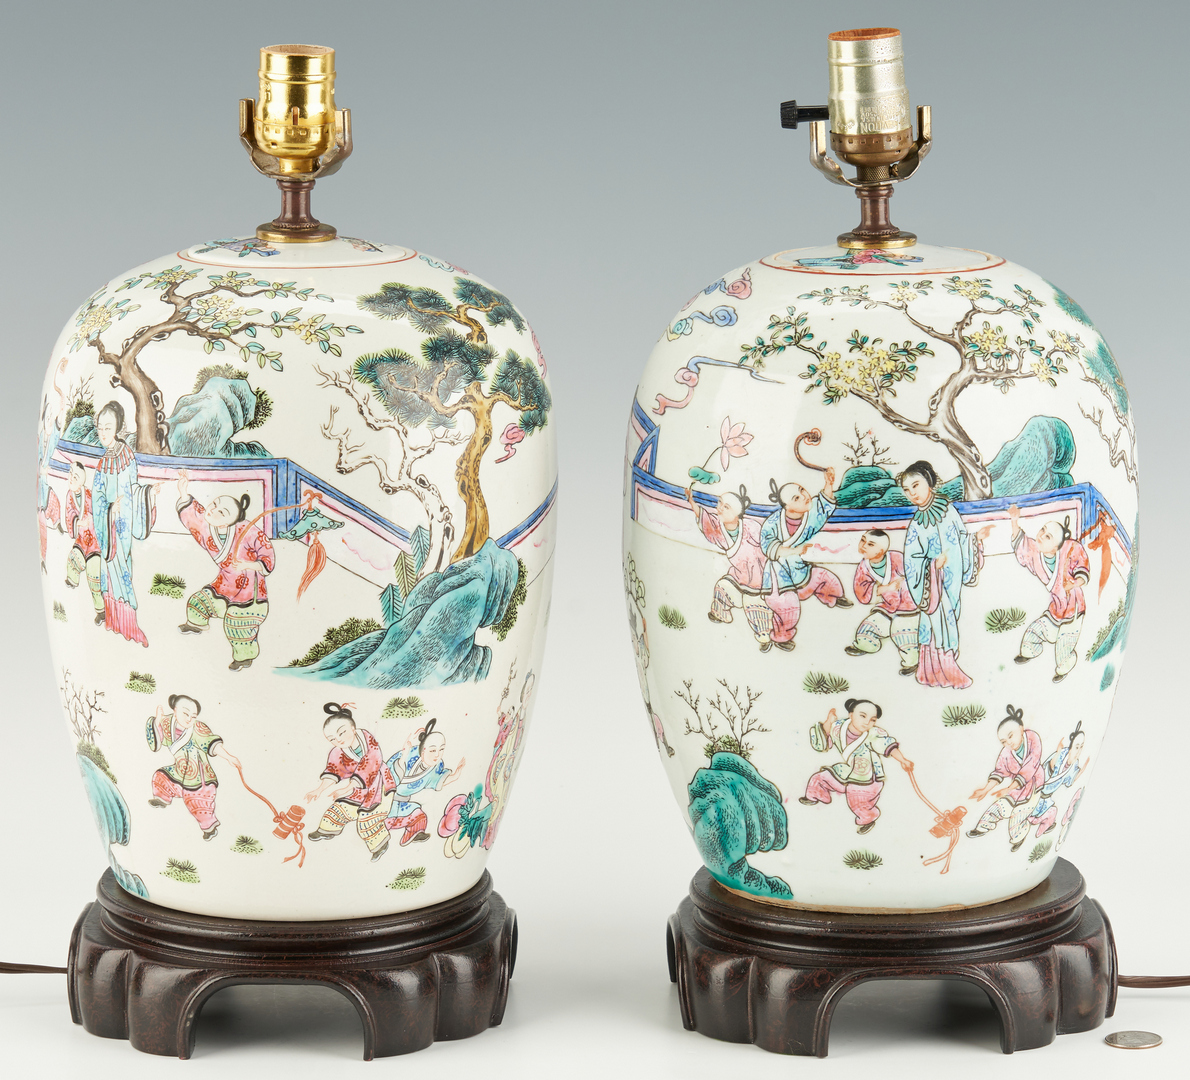 Lot 1095: Pair of Chinese Porcelain Lamps